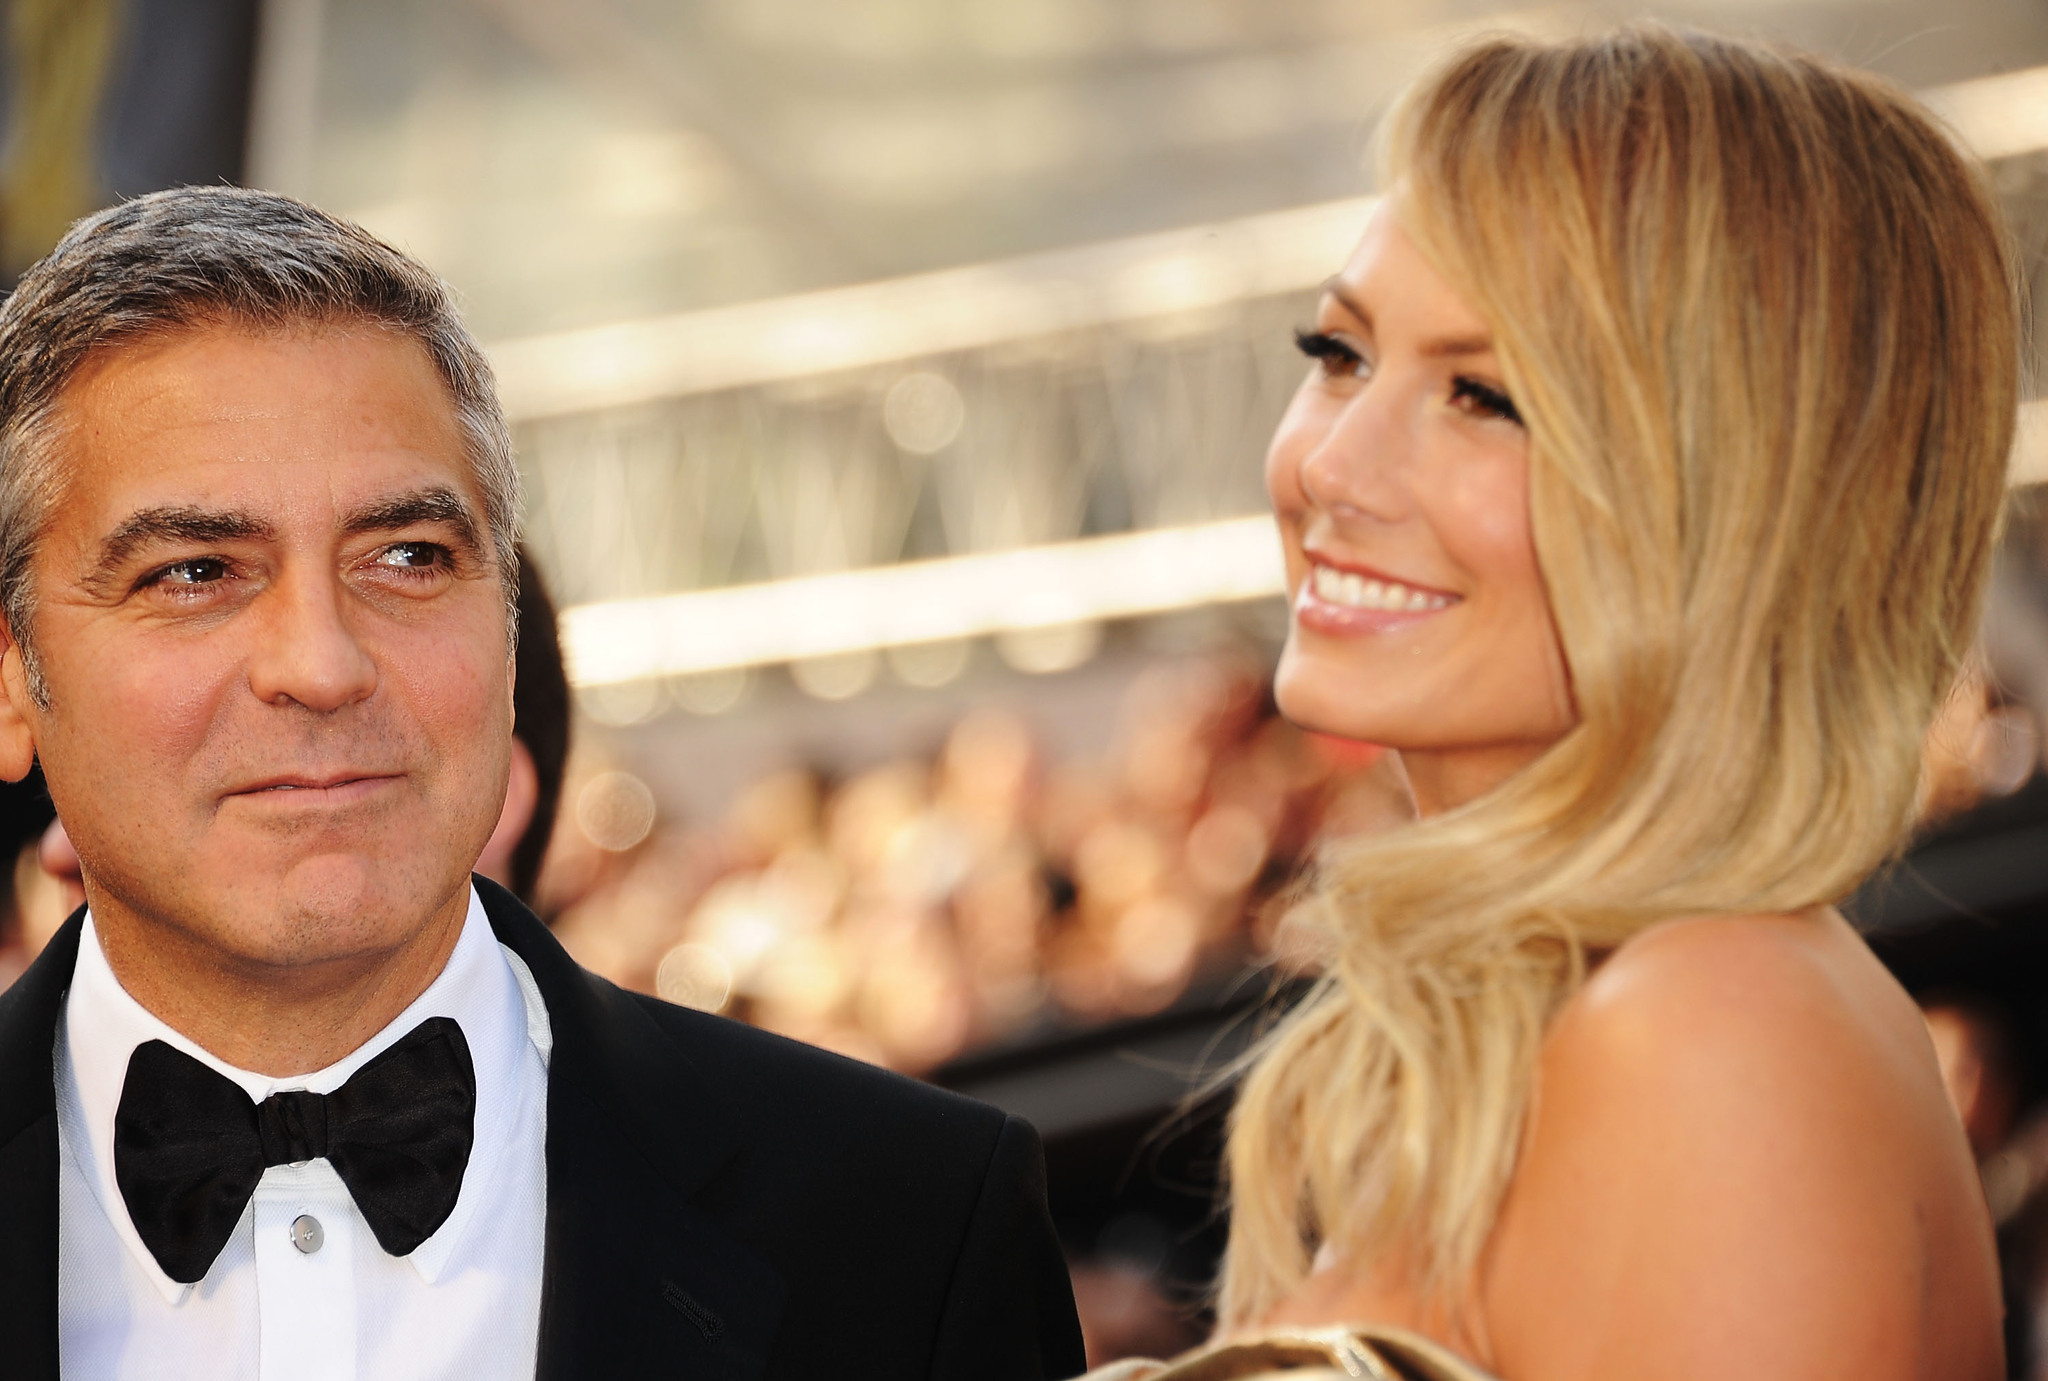 George Clooney and Stacy Keibler